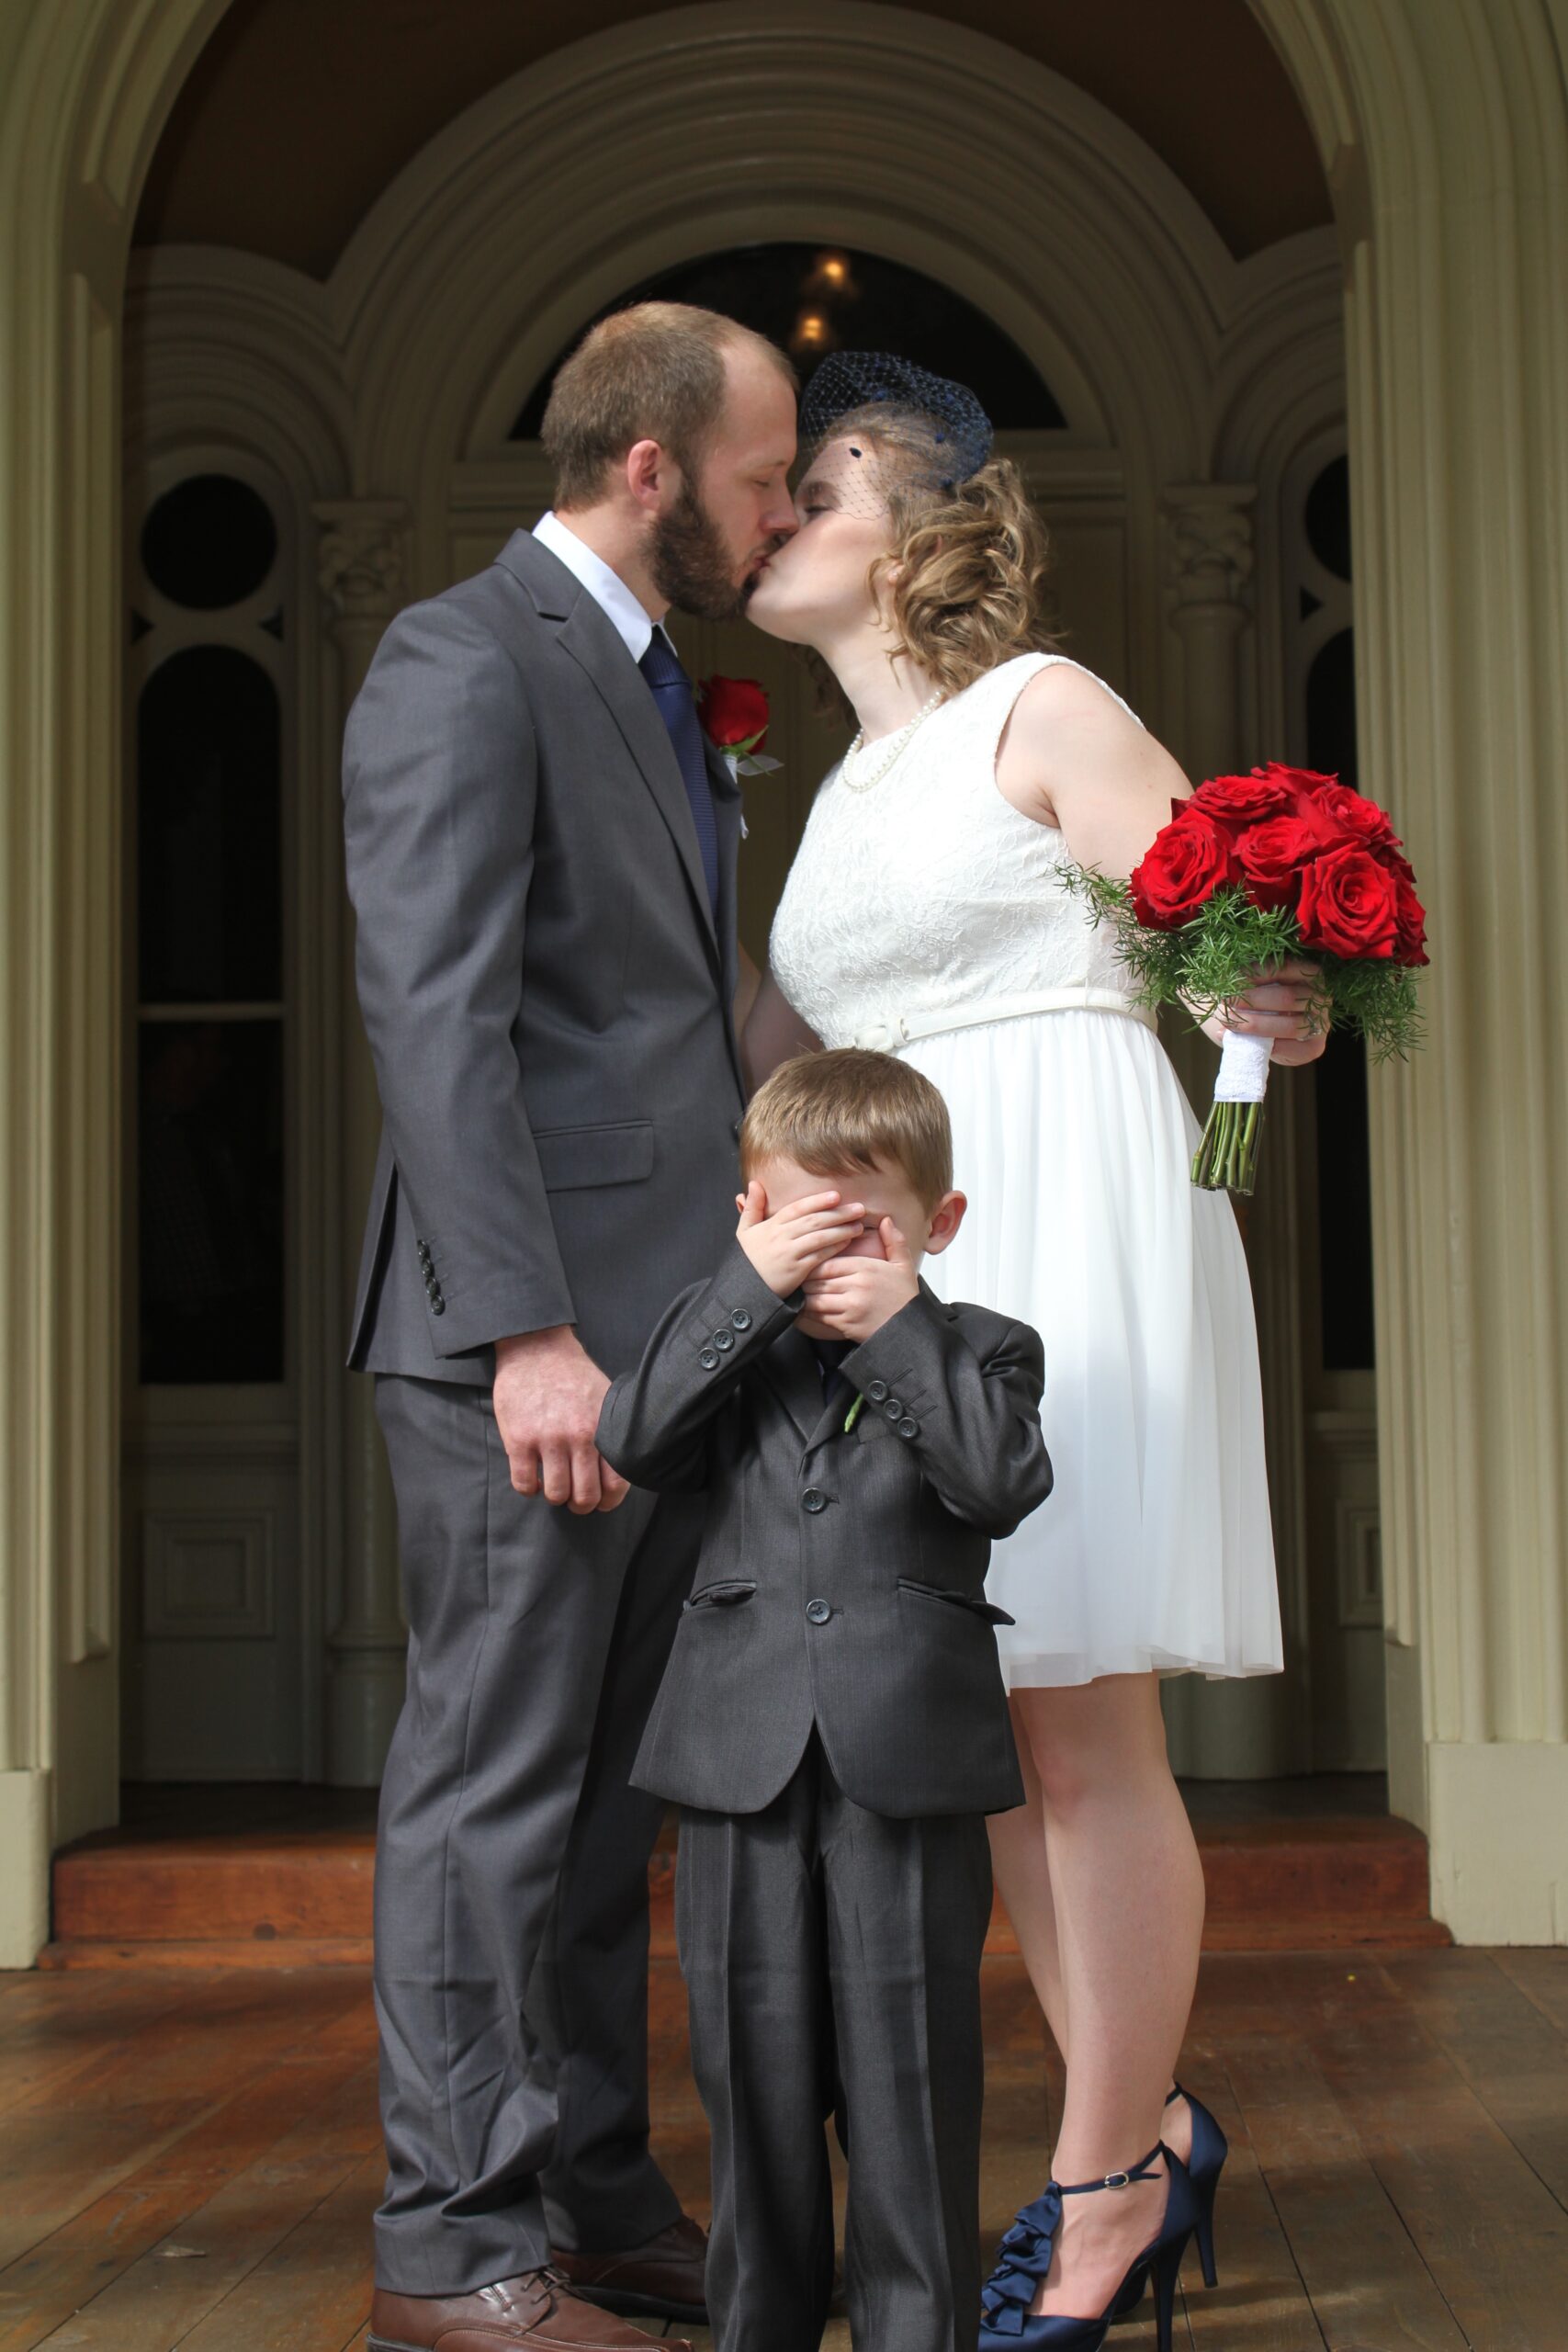 Groom, wearing a grey suit, blue tie and red rose boutonniere kisses the bride. The bride, wearing a white lace sundress and navy bird cage veil with navy ruffled heels, holds a large bouquet of red roses. Their son, wearing a gray suit and navy tie covers his eyes as his parents kiss. 